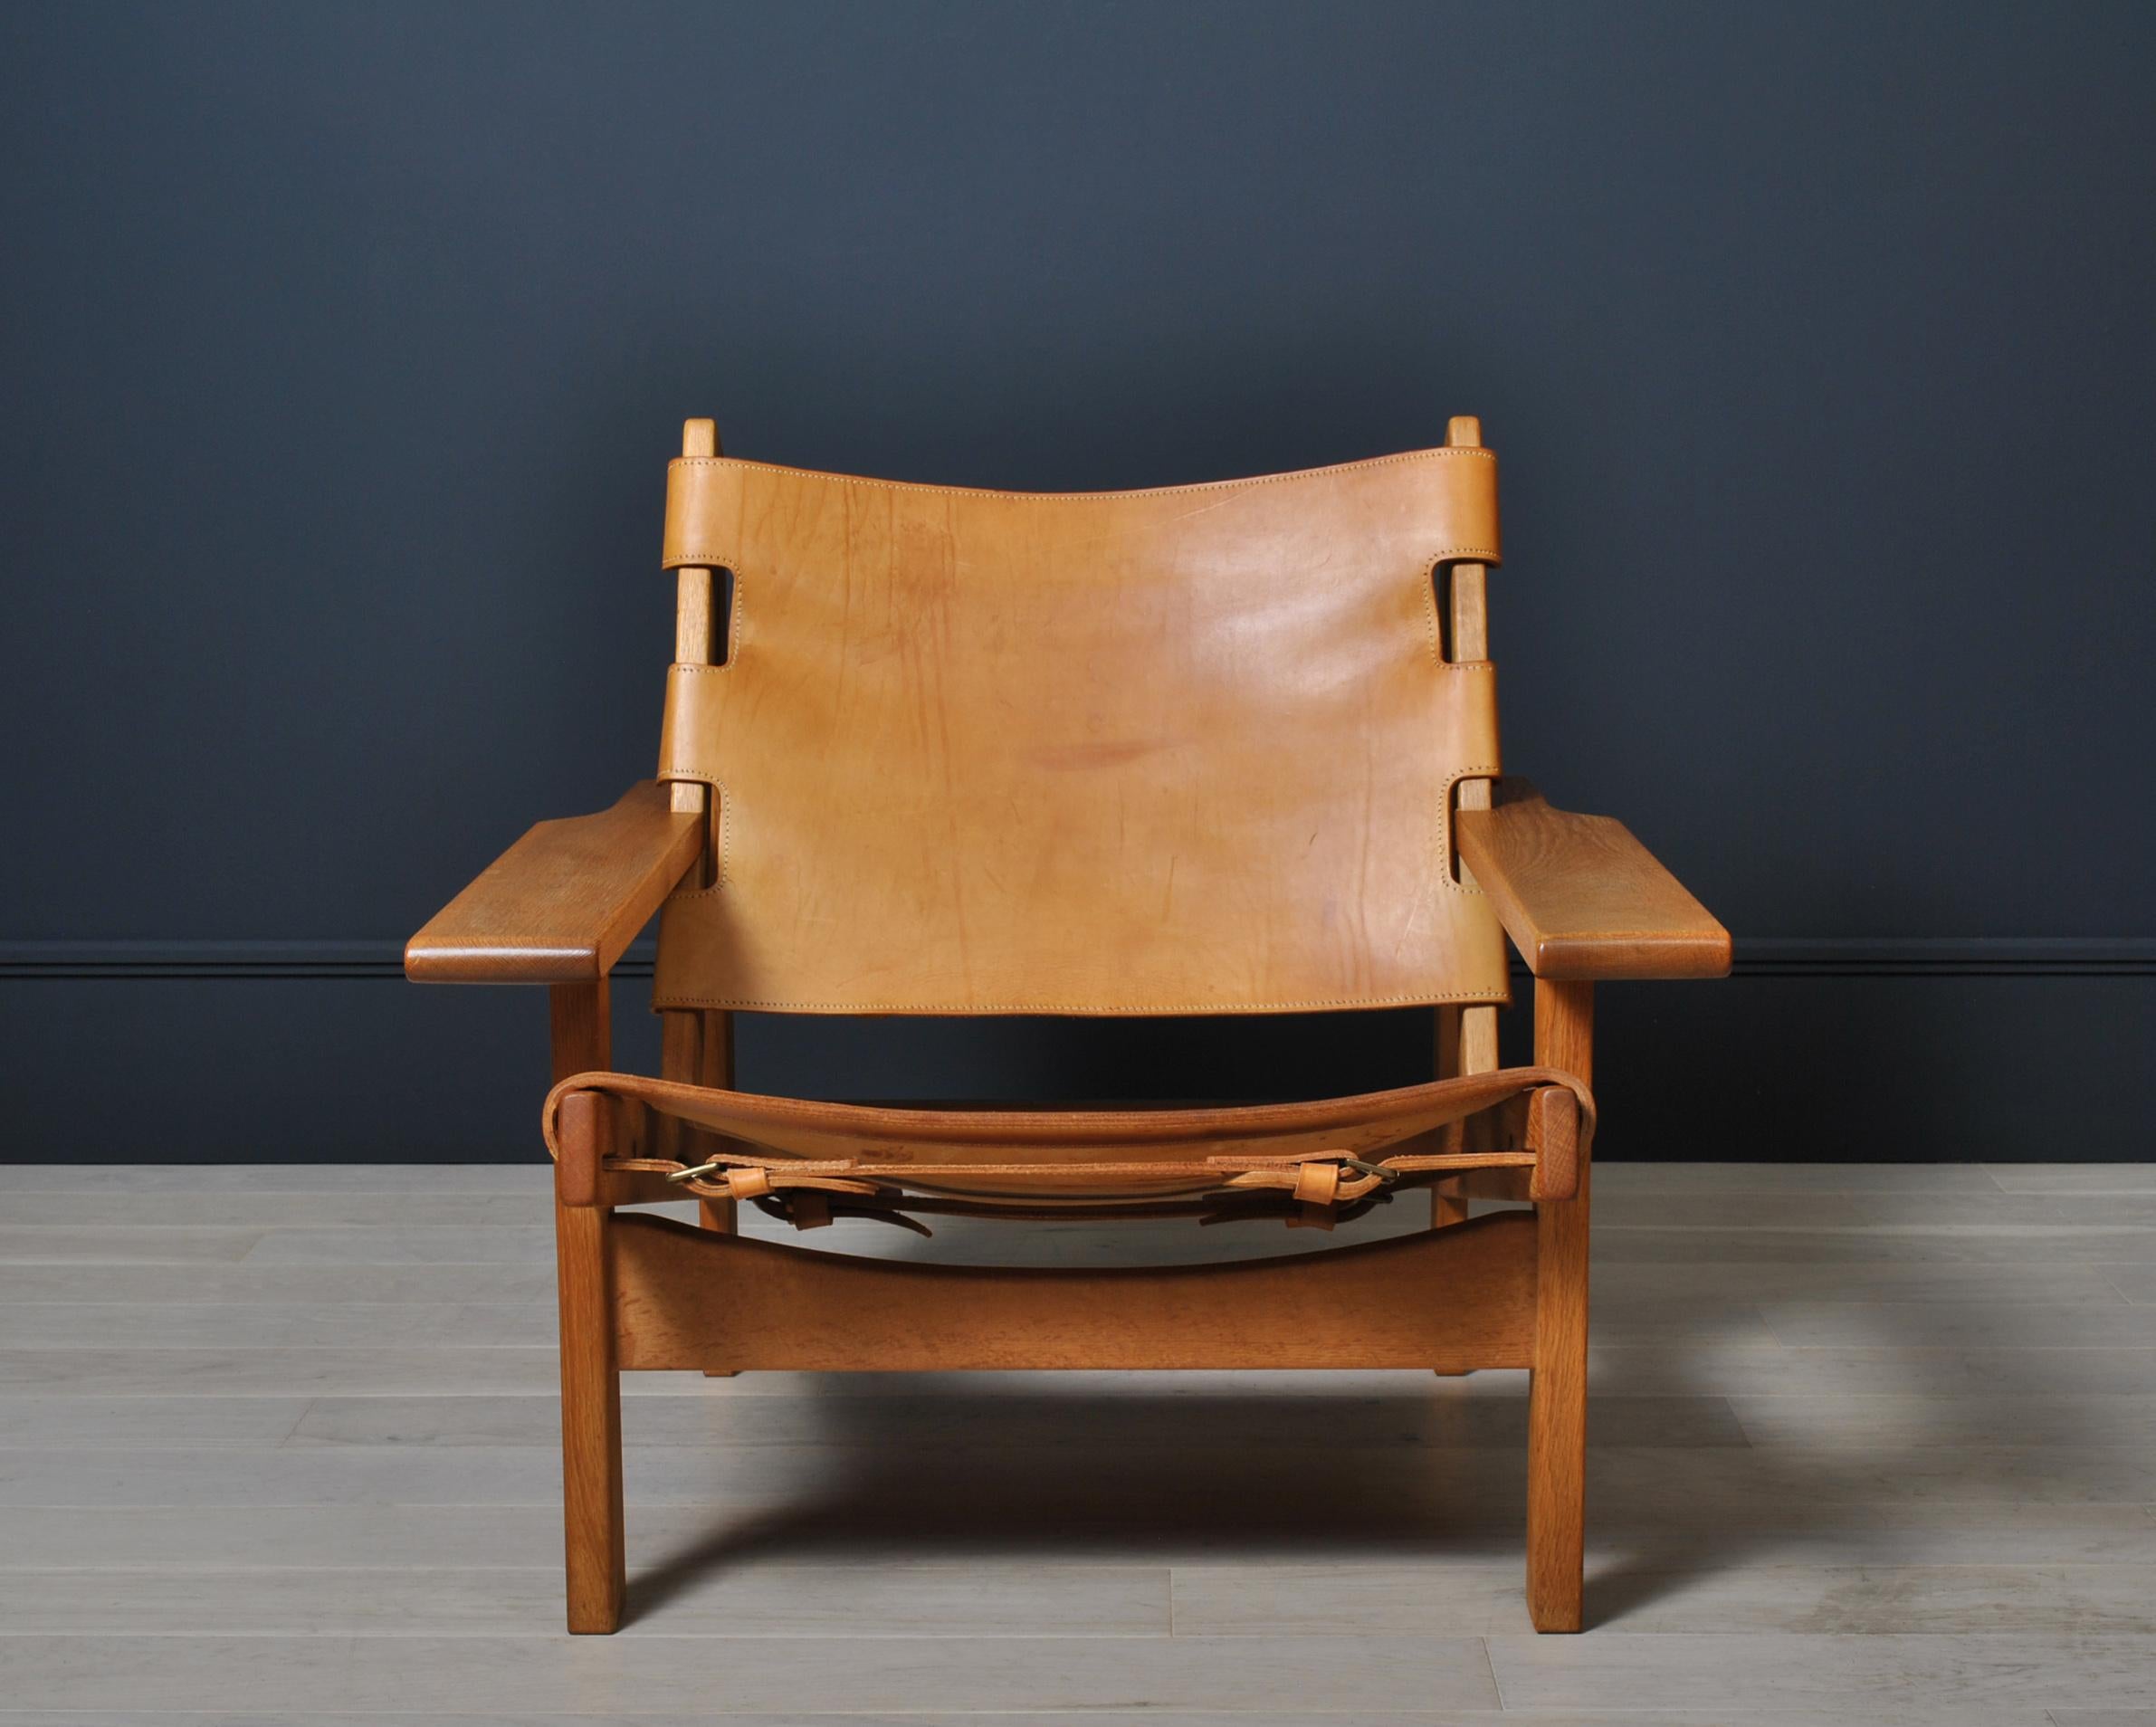 An incredible original example of the Classic Kurt Østervig ‘hunting’ chair. Oak frame with thick saddle leather fastened via buckled straps. A sturdy and imposing chair. Lovely colouring and in superb condition. Cleaned, polished and conditioned.